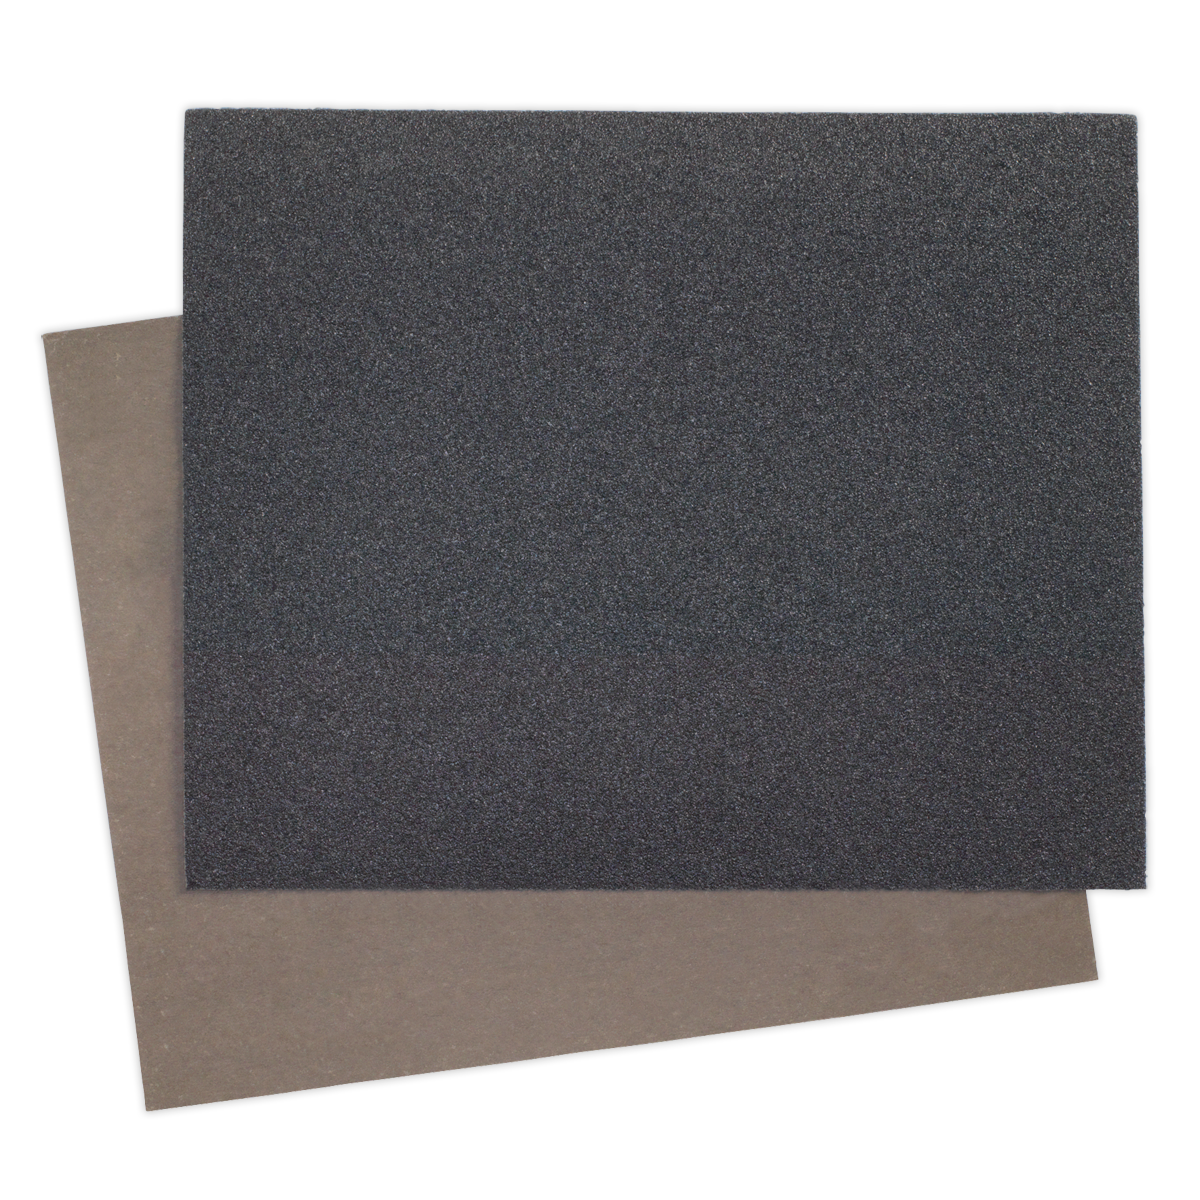 Wet & Dry Paper 230 x 280mm 240Grit Pack of 25